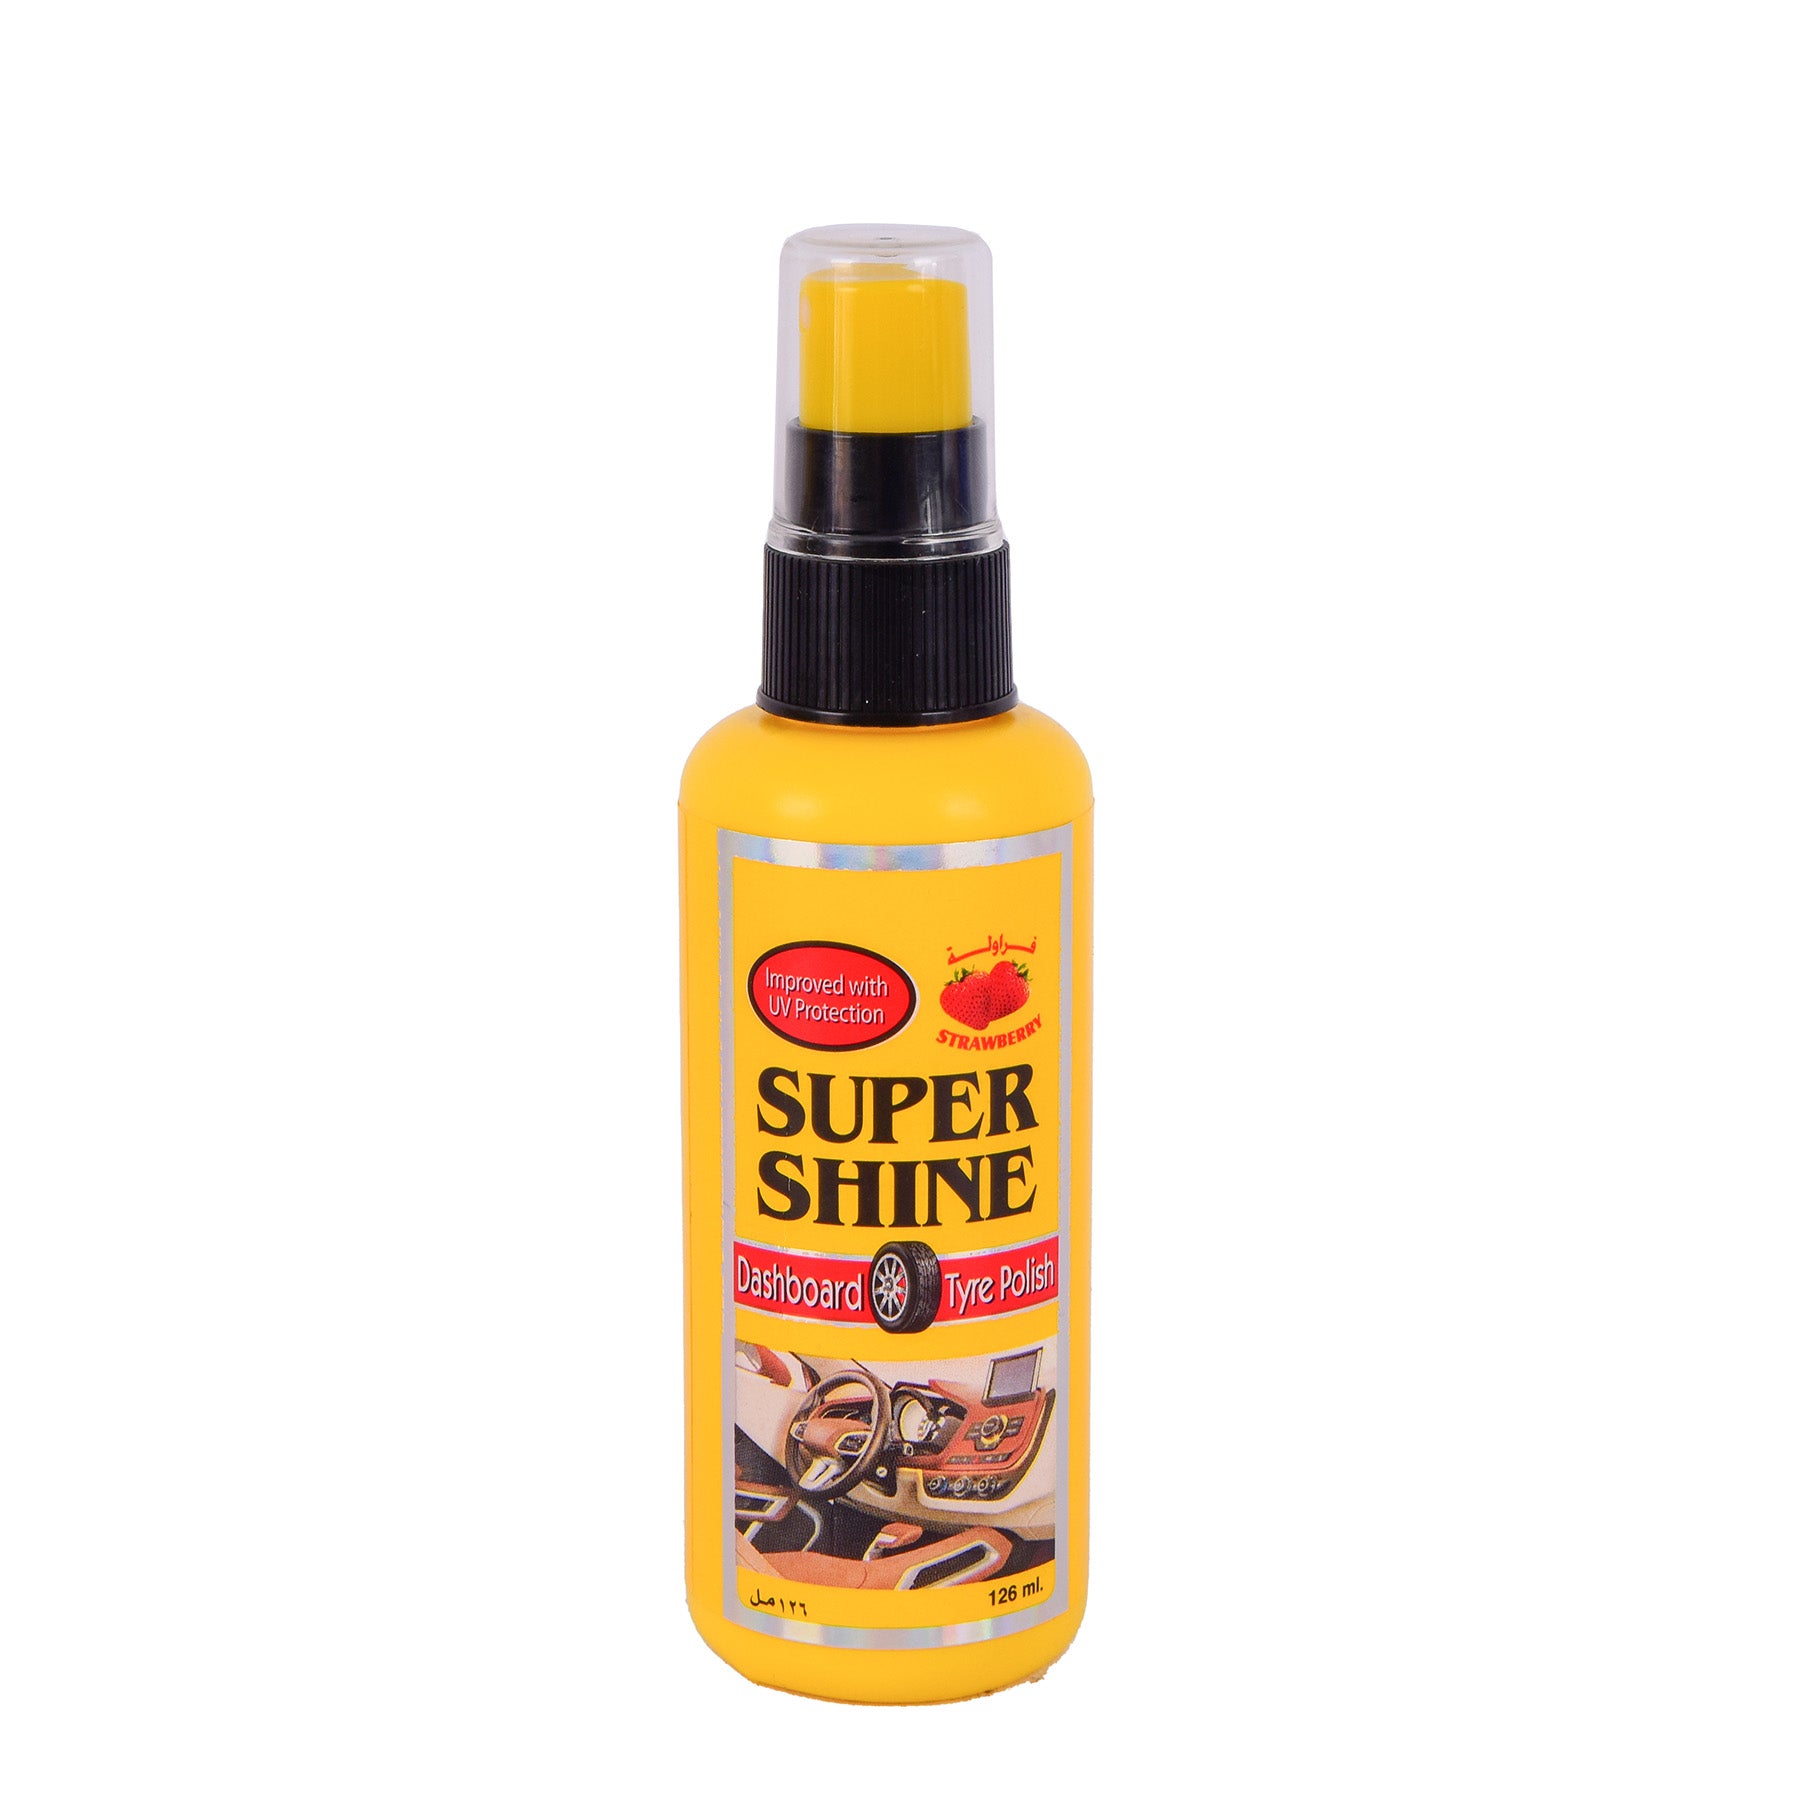 Scented Tire cleaning sprayCapacity: 126 ml